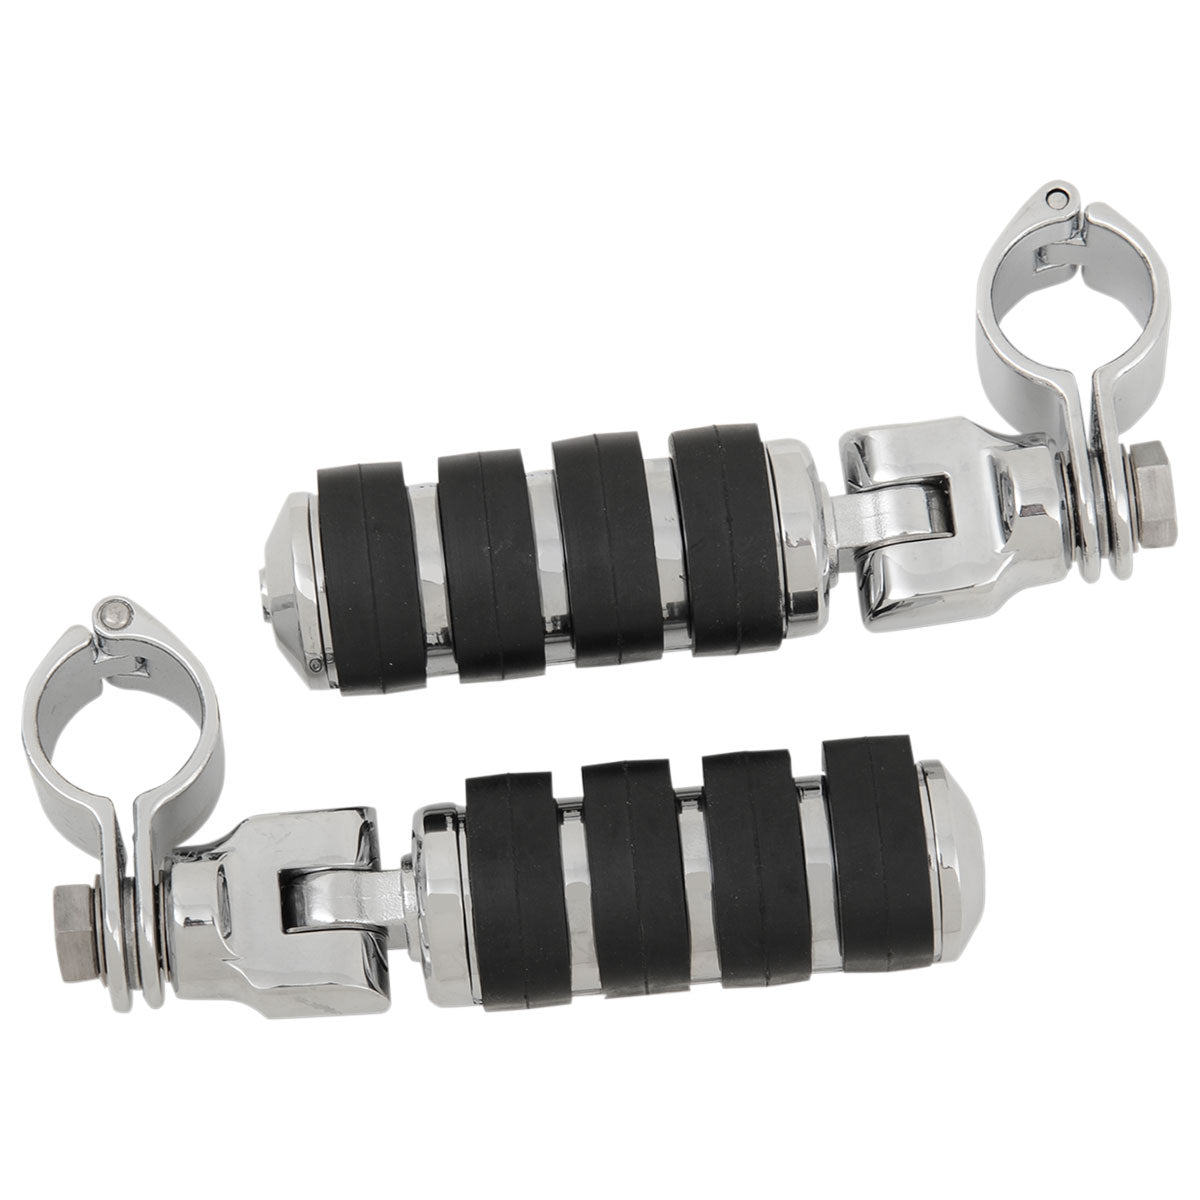 Custom Large Chrome Pegs with Mounts and 1-1/4" Quick Clamps